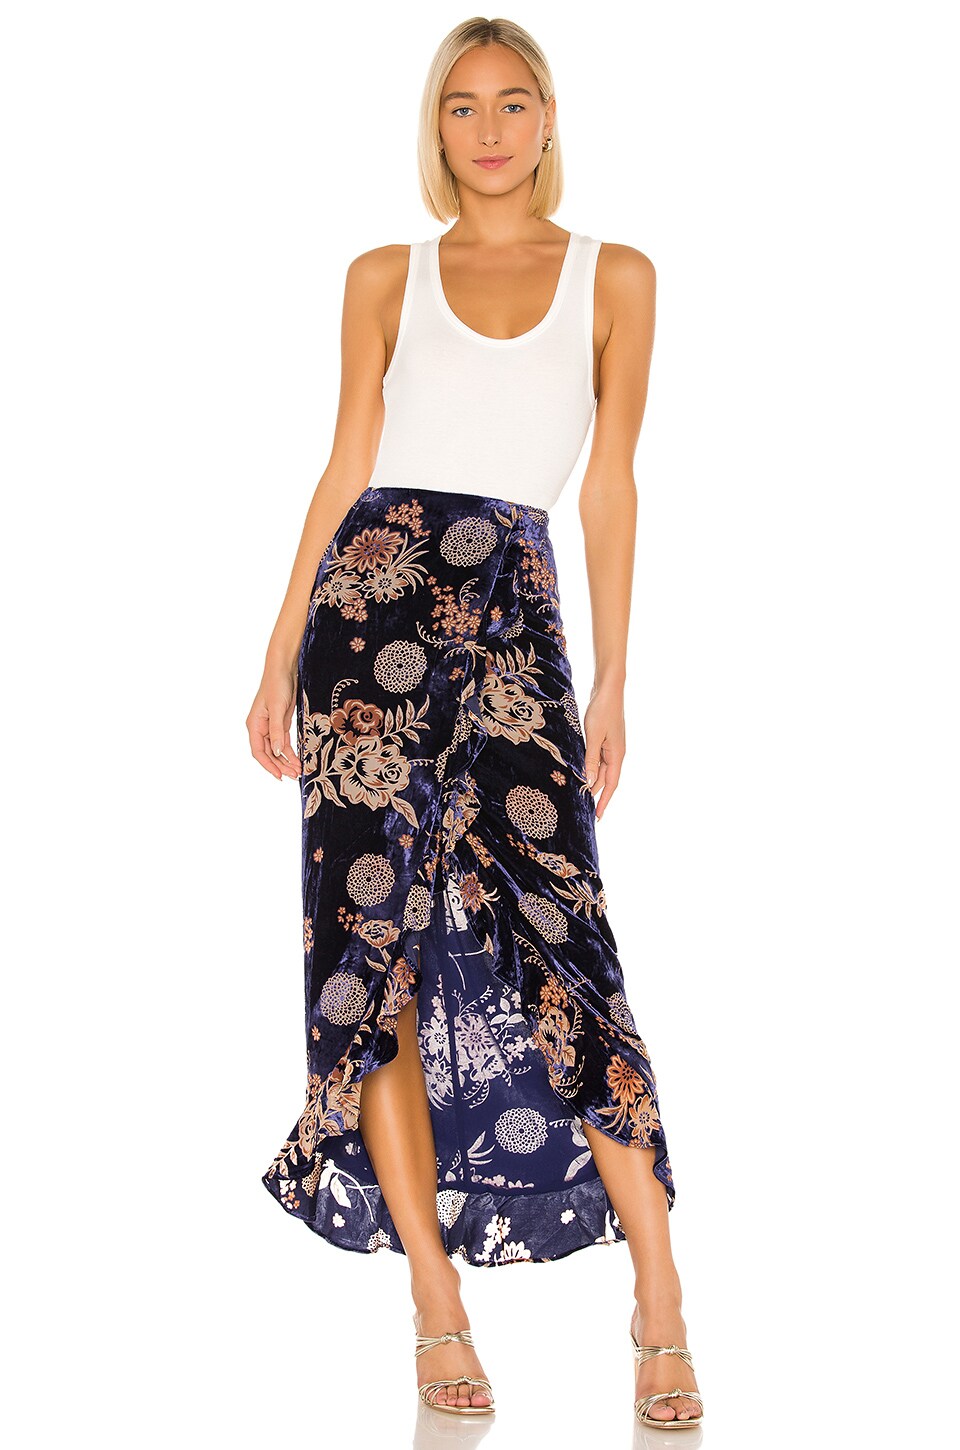 House of Harlow 1960 x REVOLVE Ferris Maxi Skirt in Navy Floral Multi ...